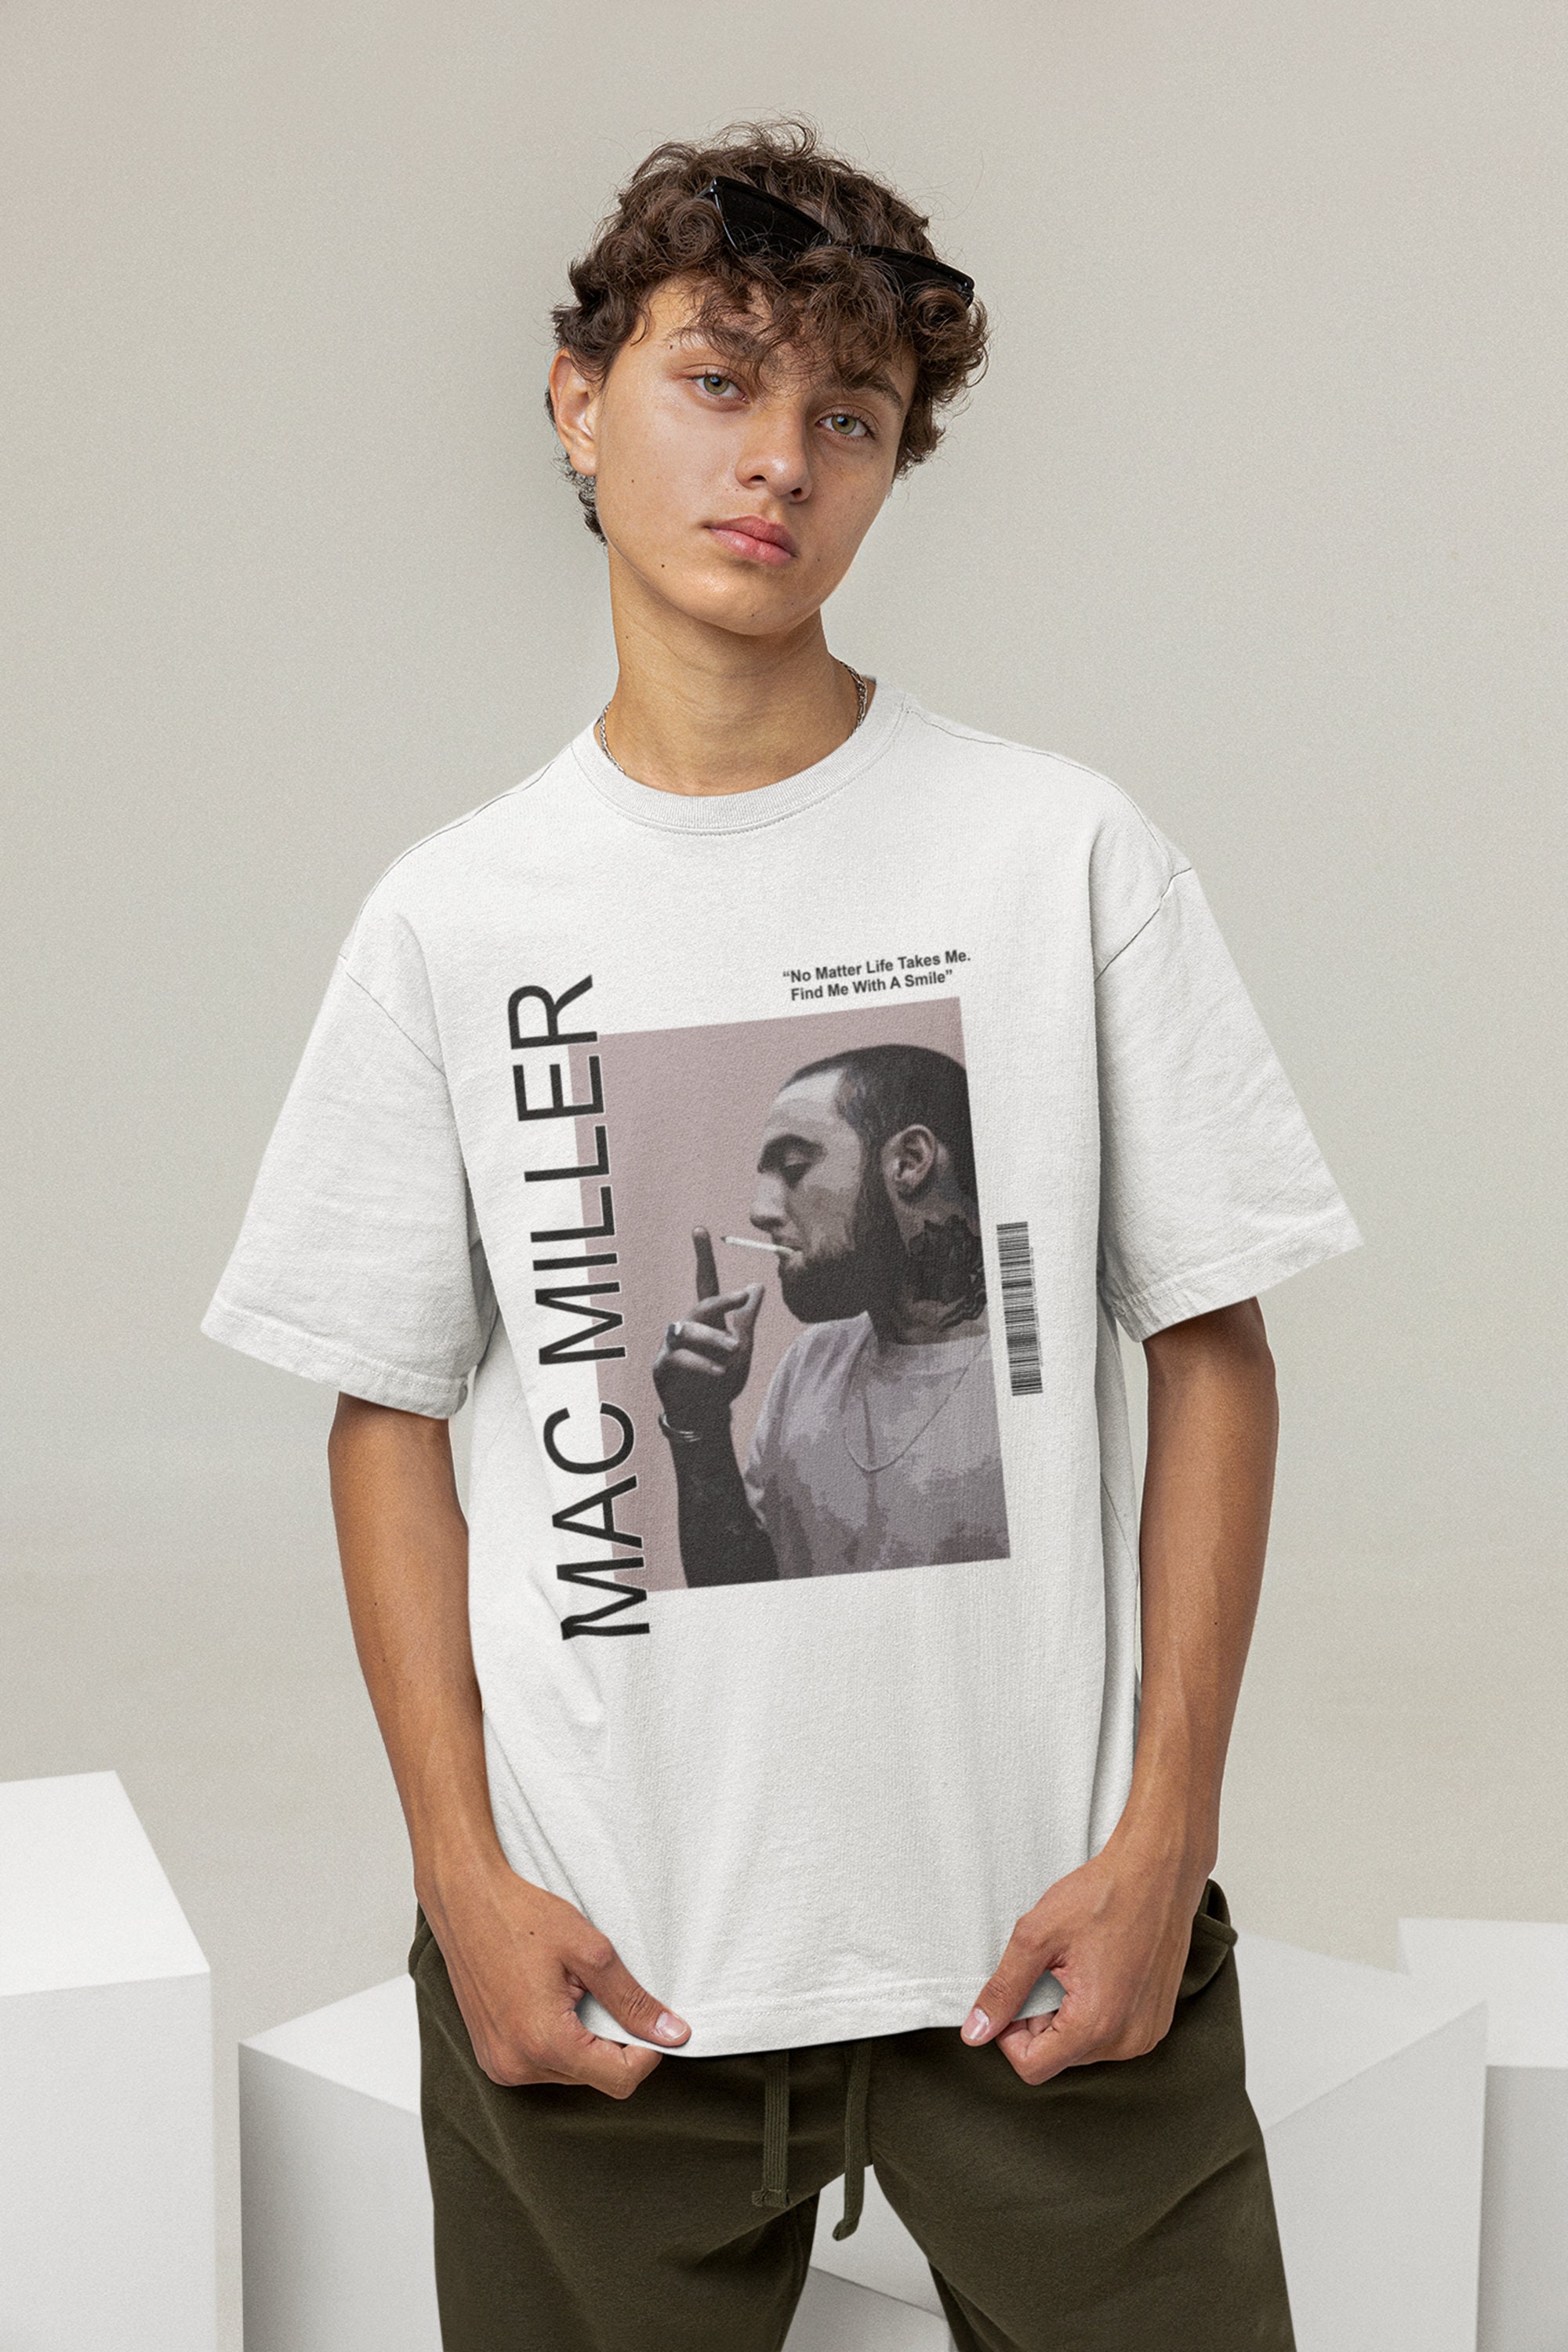 Discover macmiller Vintage Music T Shirt